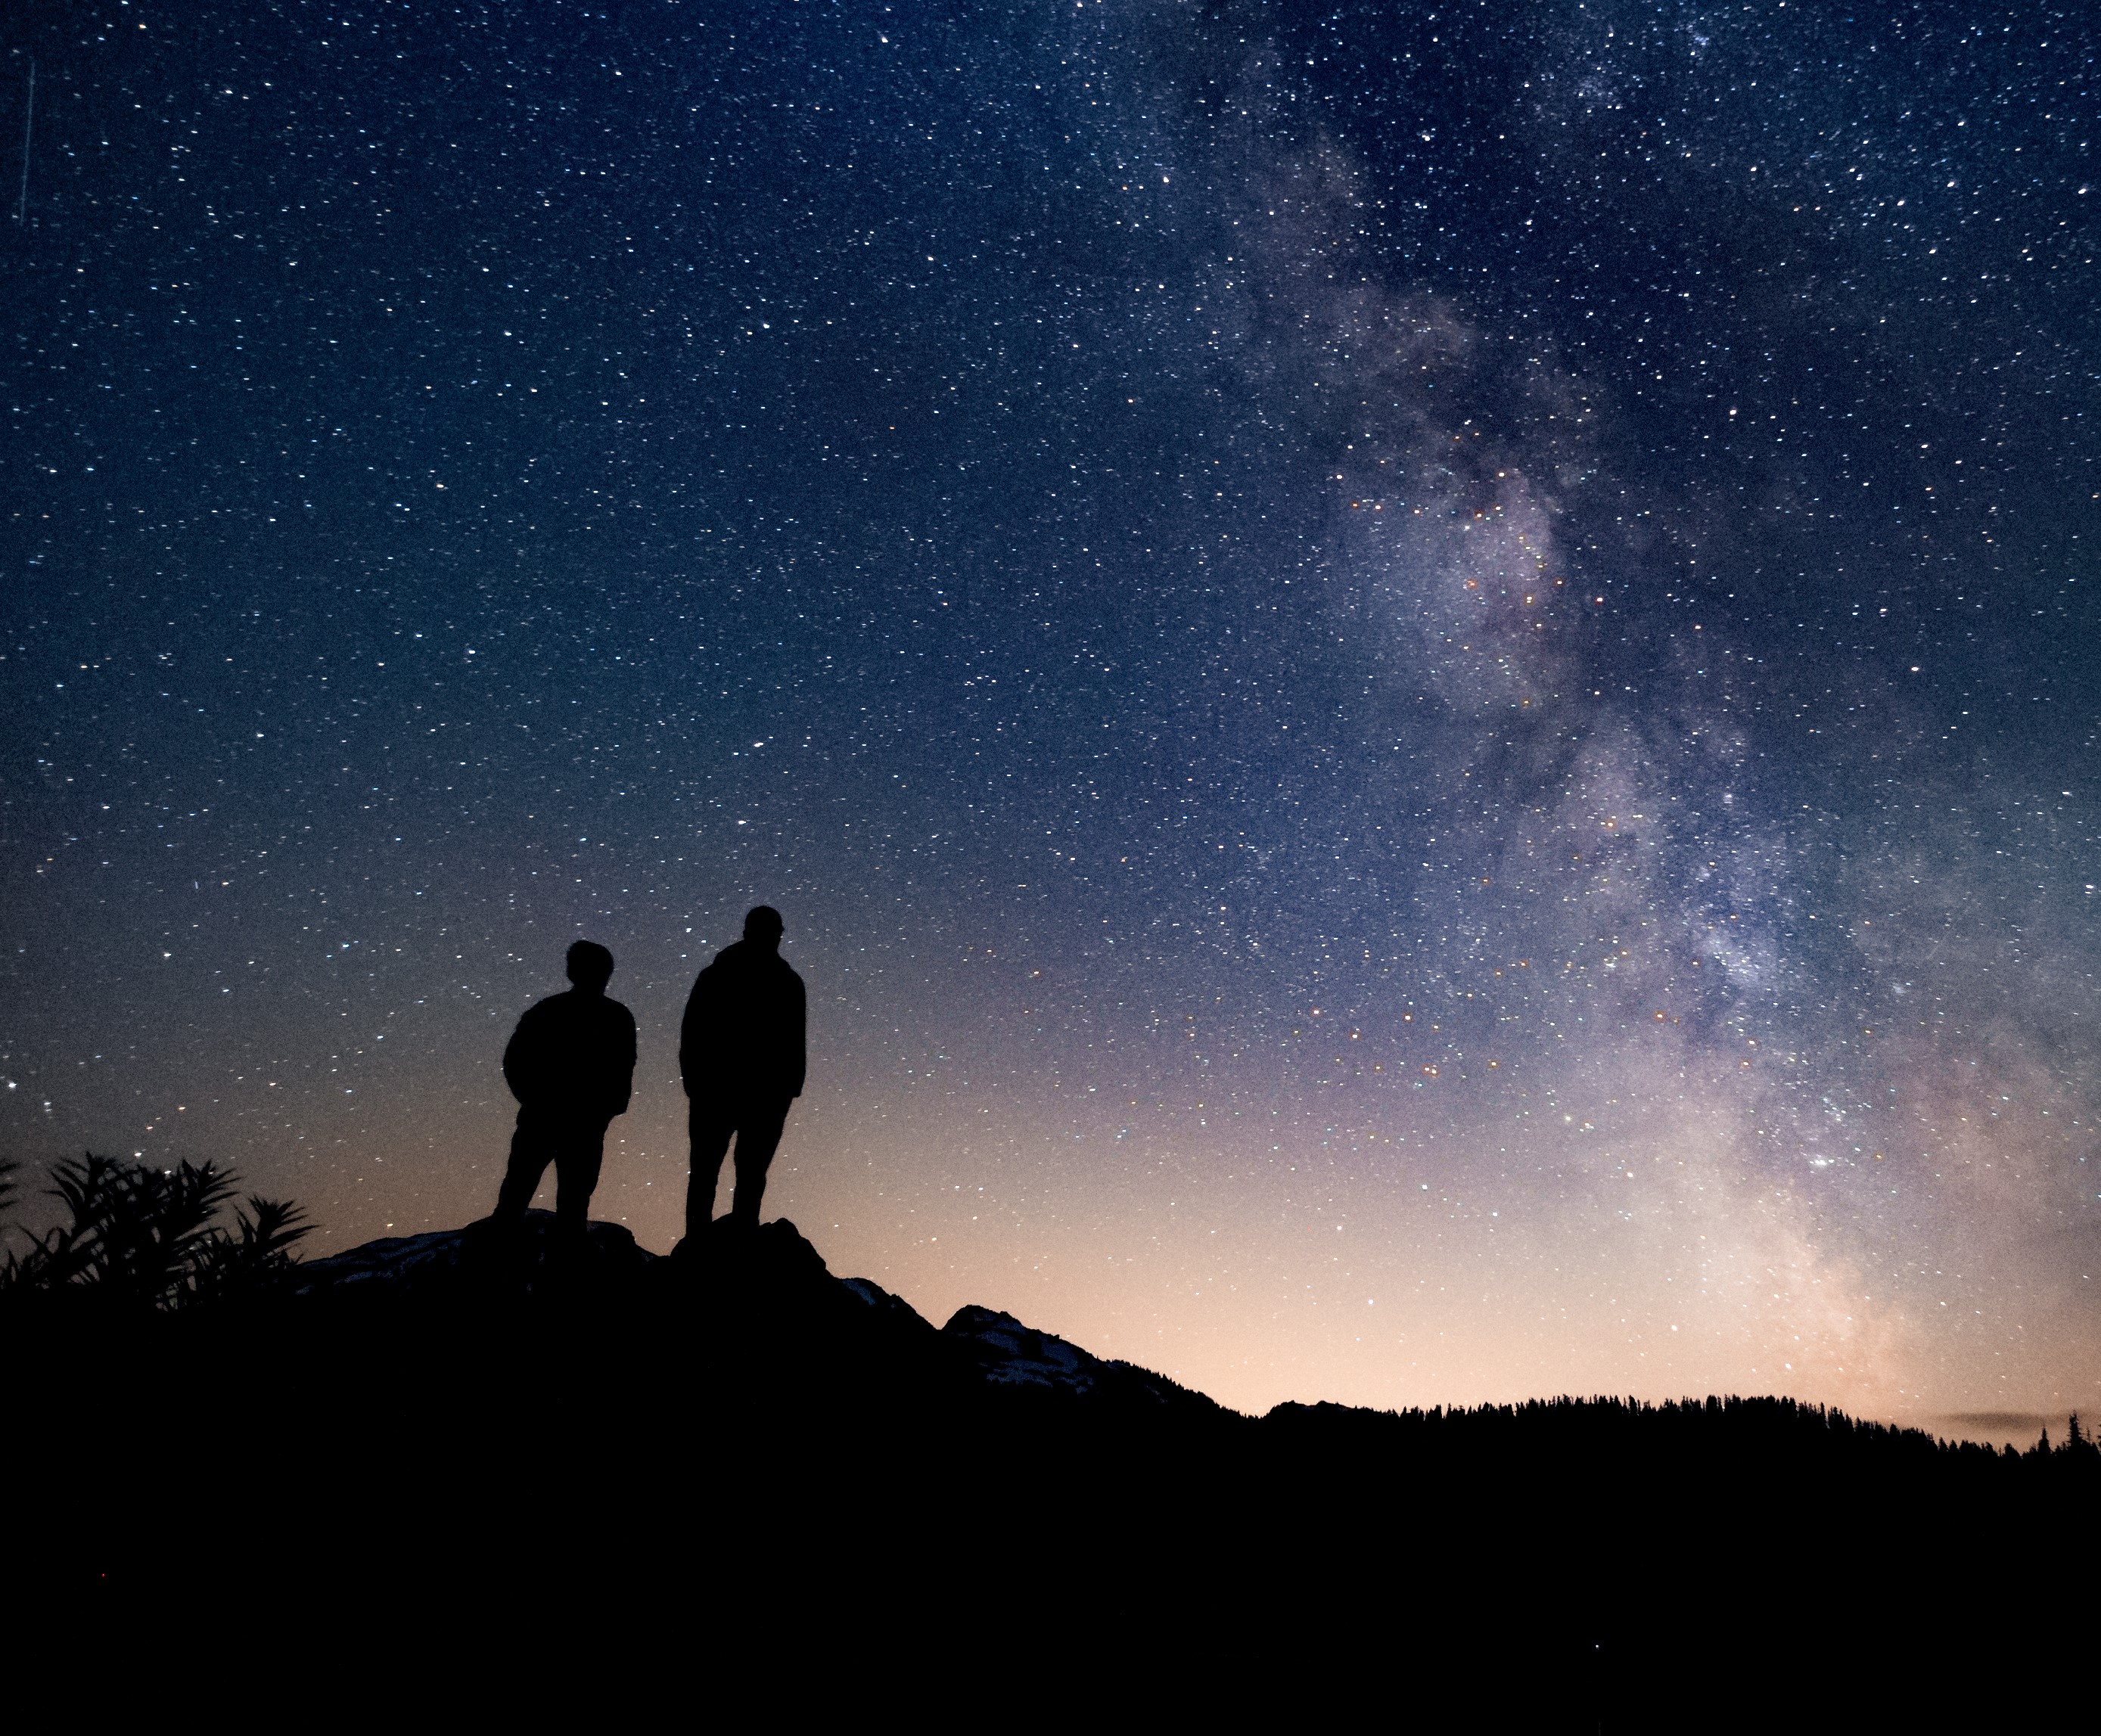 Silhouettes of two people against a night sky.